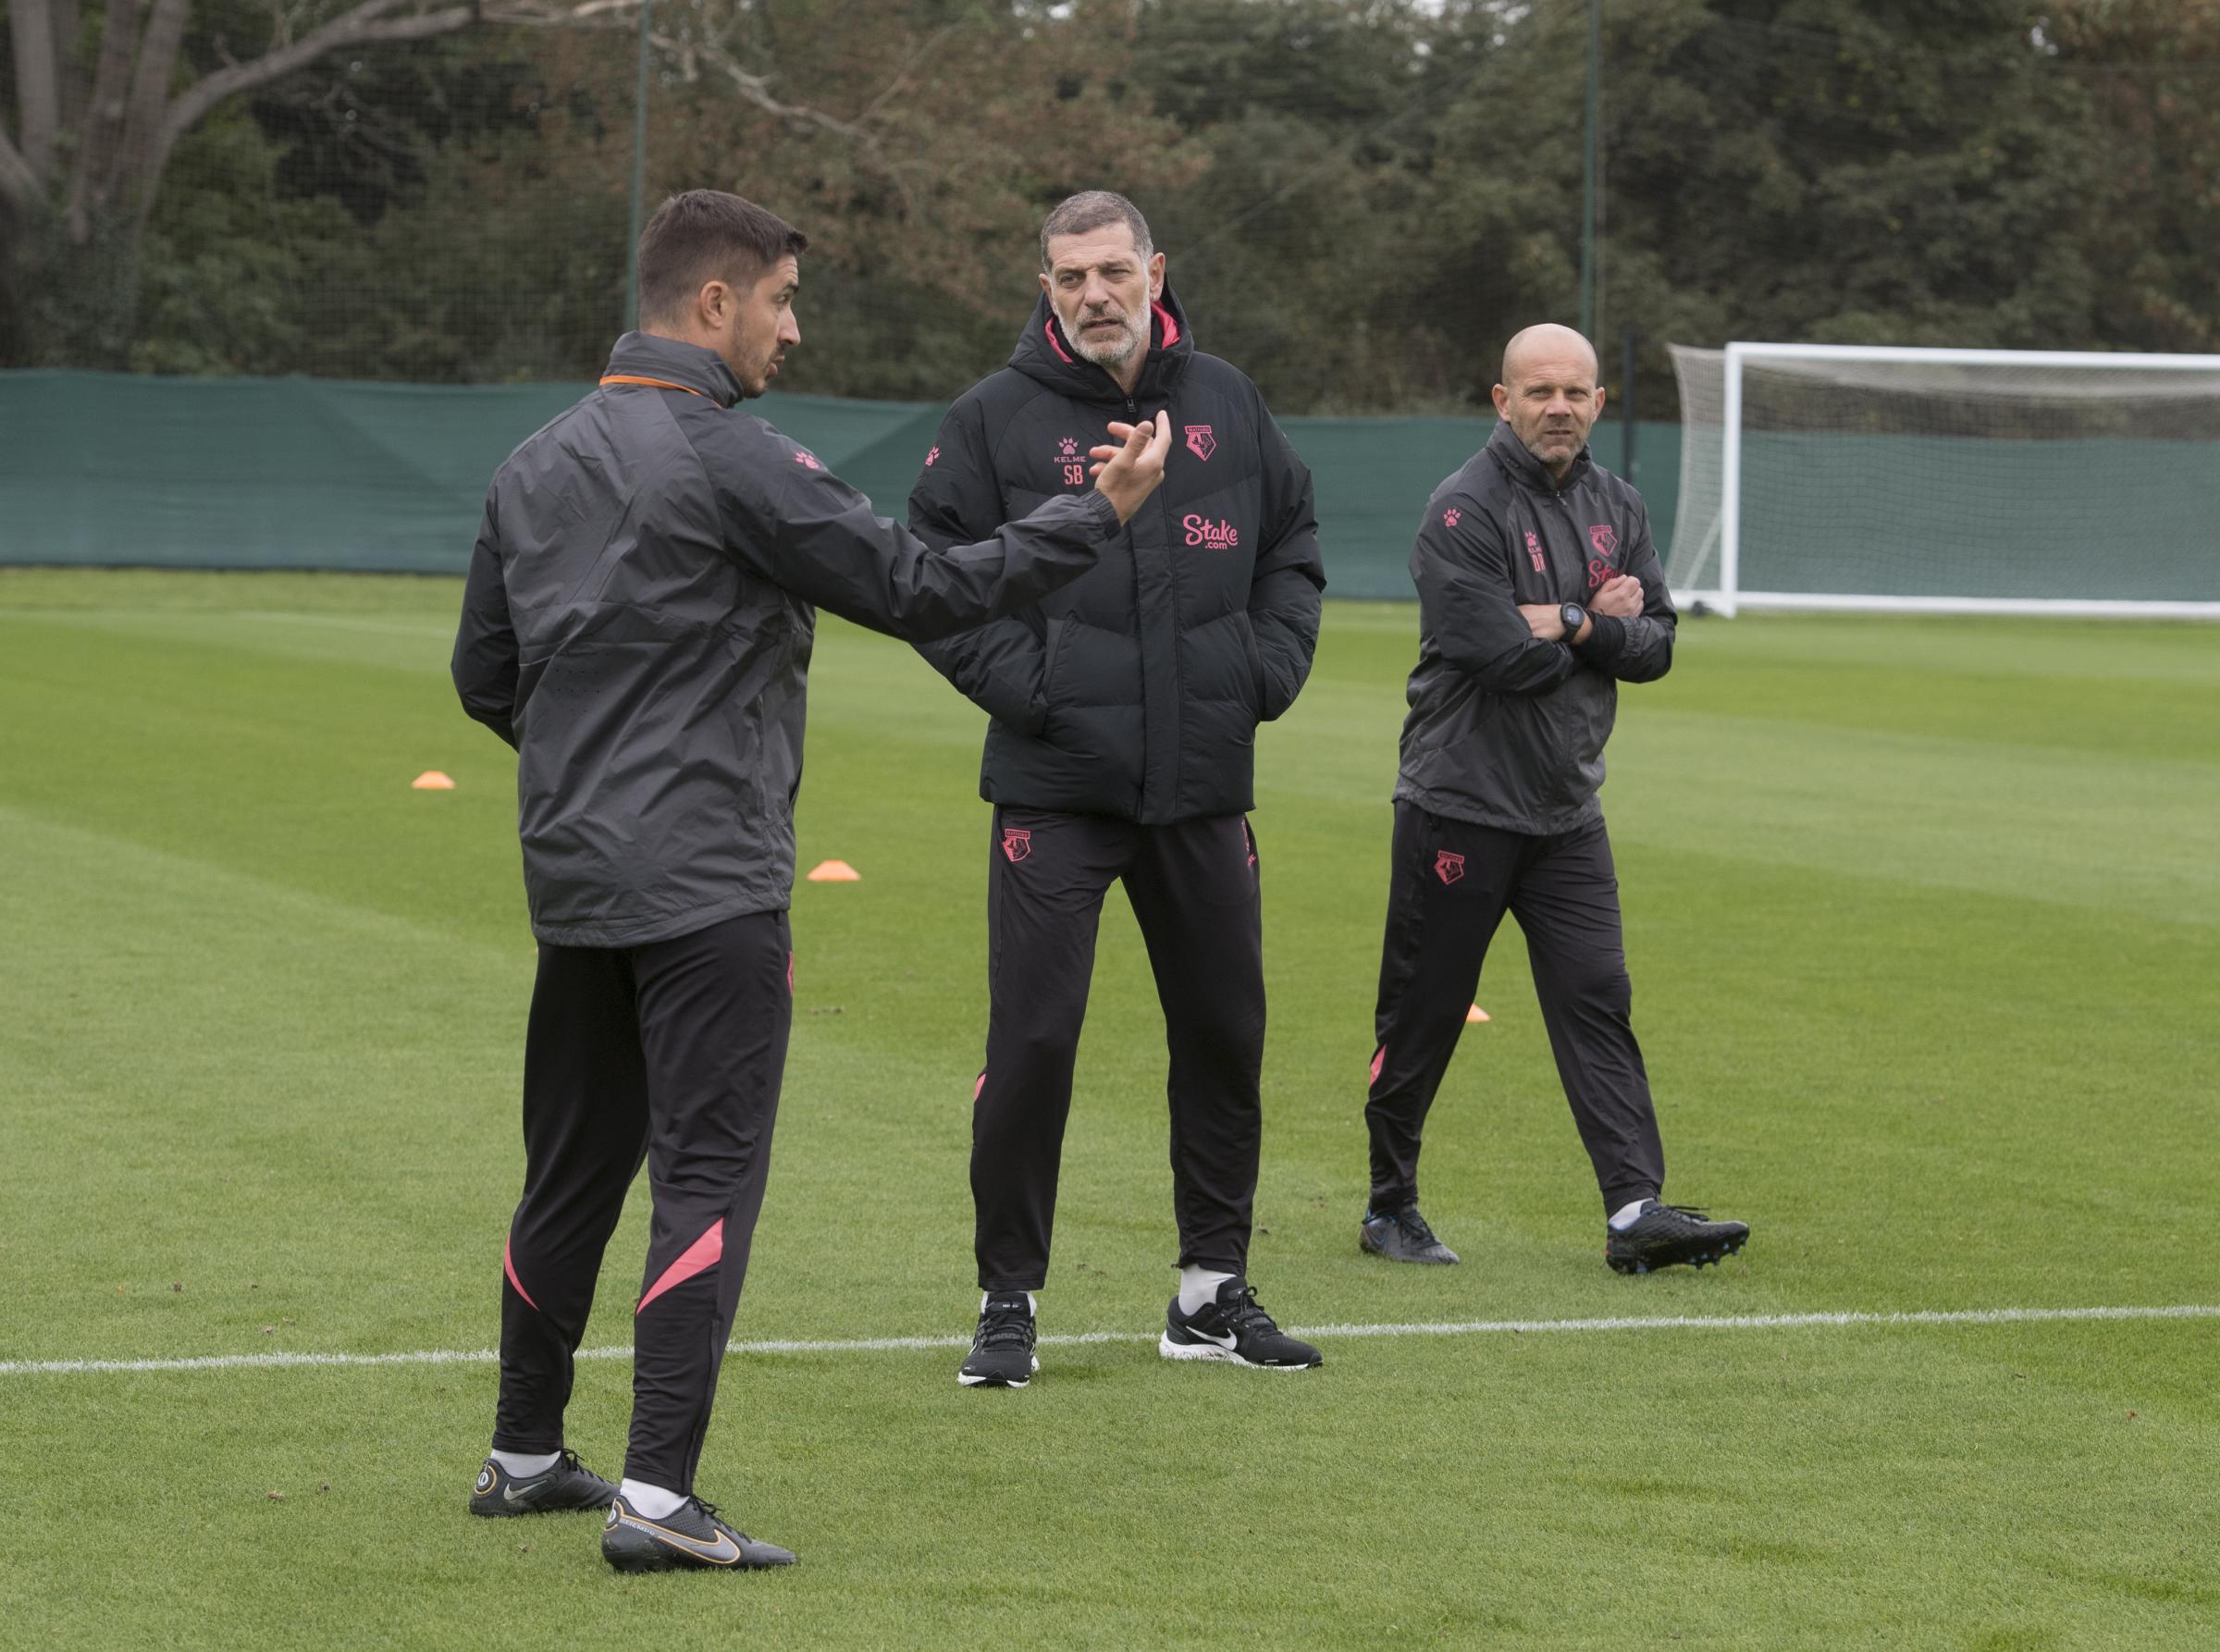 Bilic spells out that he's in control at the training ground